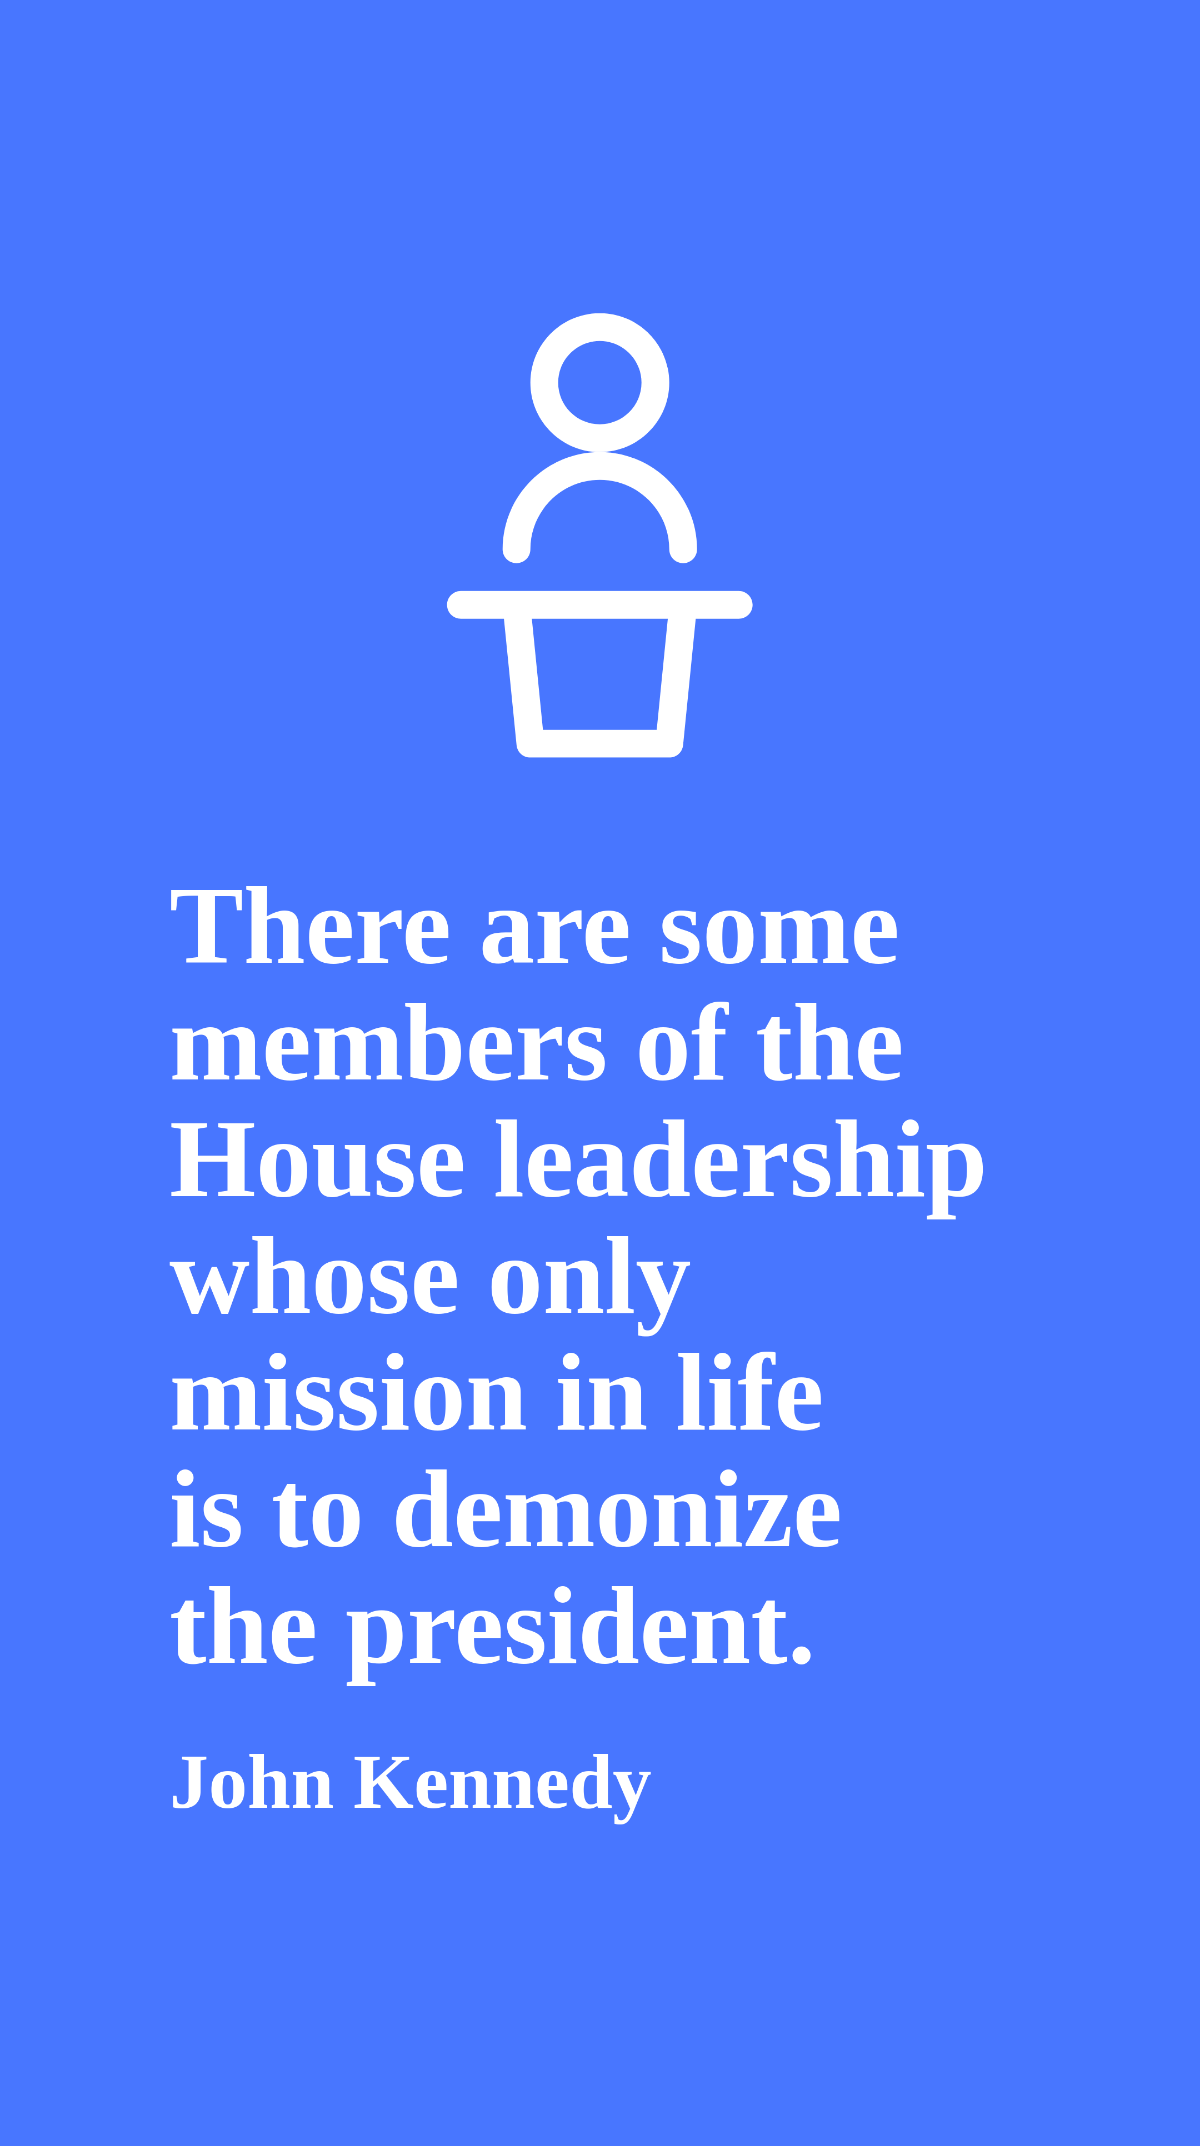 John Kennedy - There are some members of the House leadership whose only mission in life is to demonize the president. Template